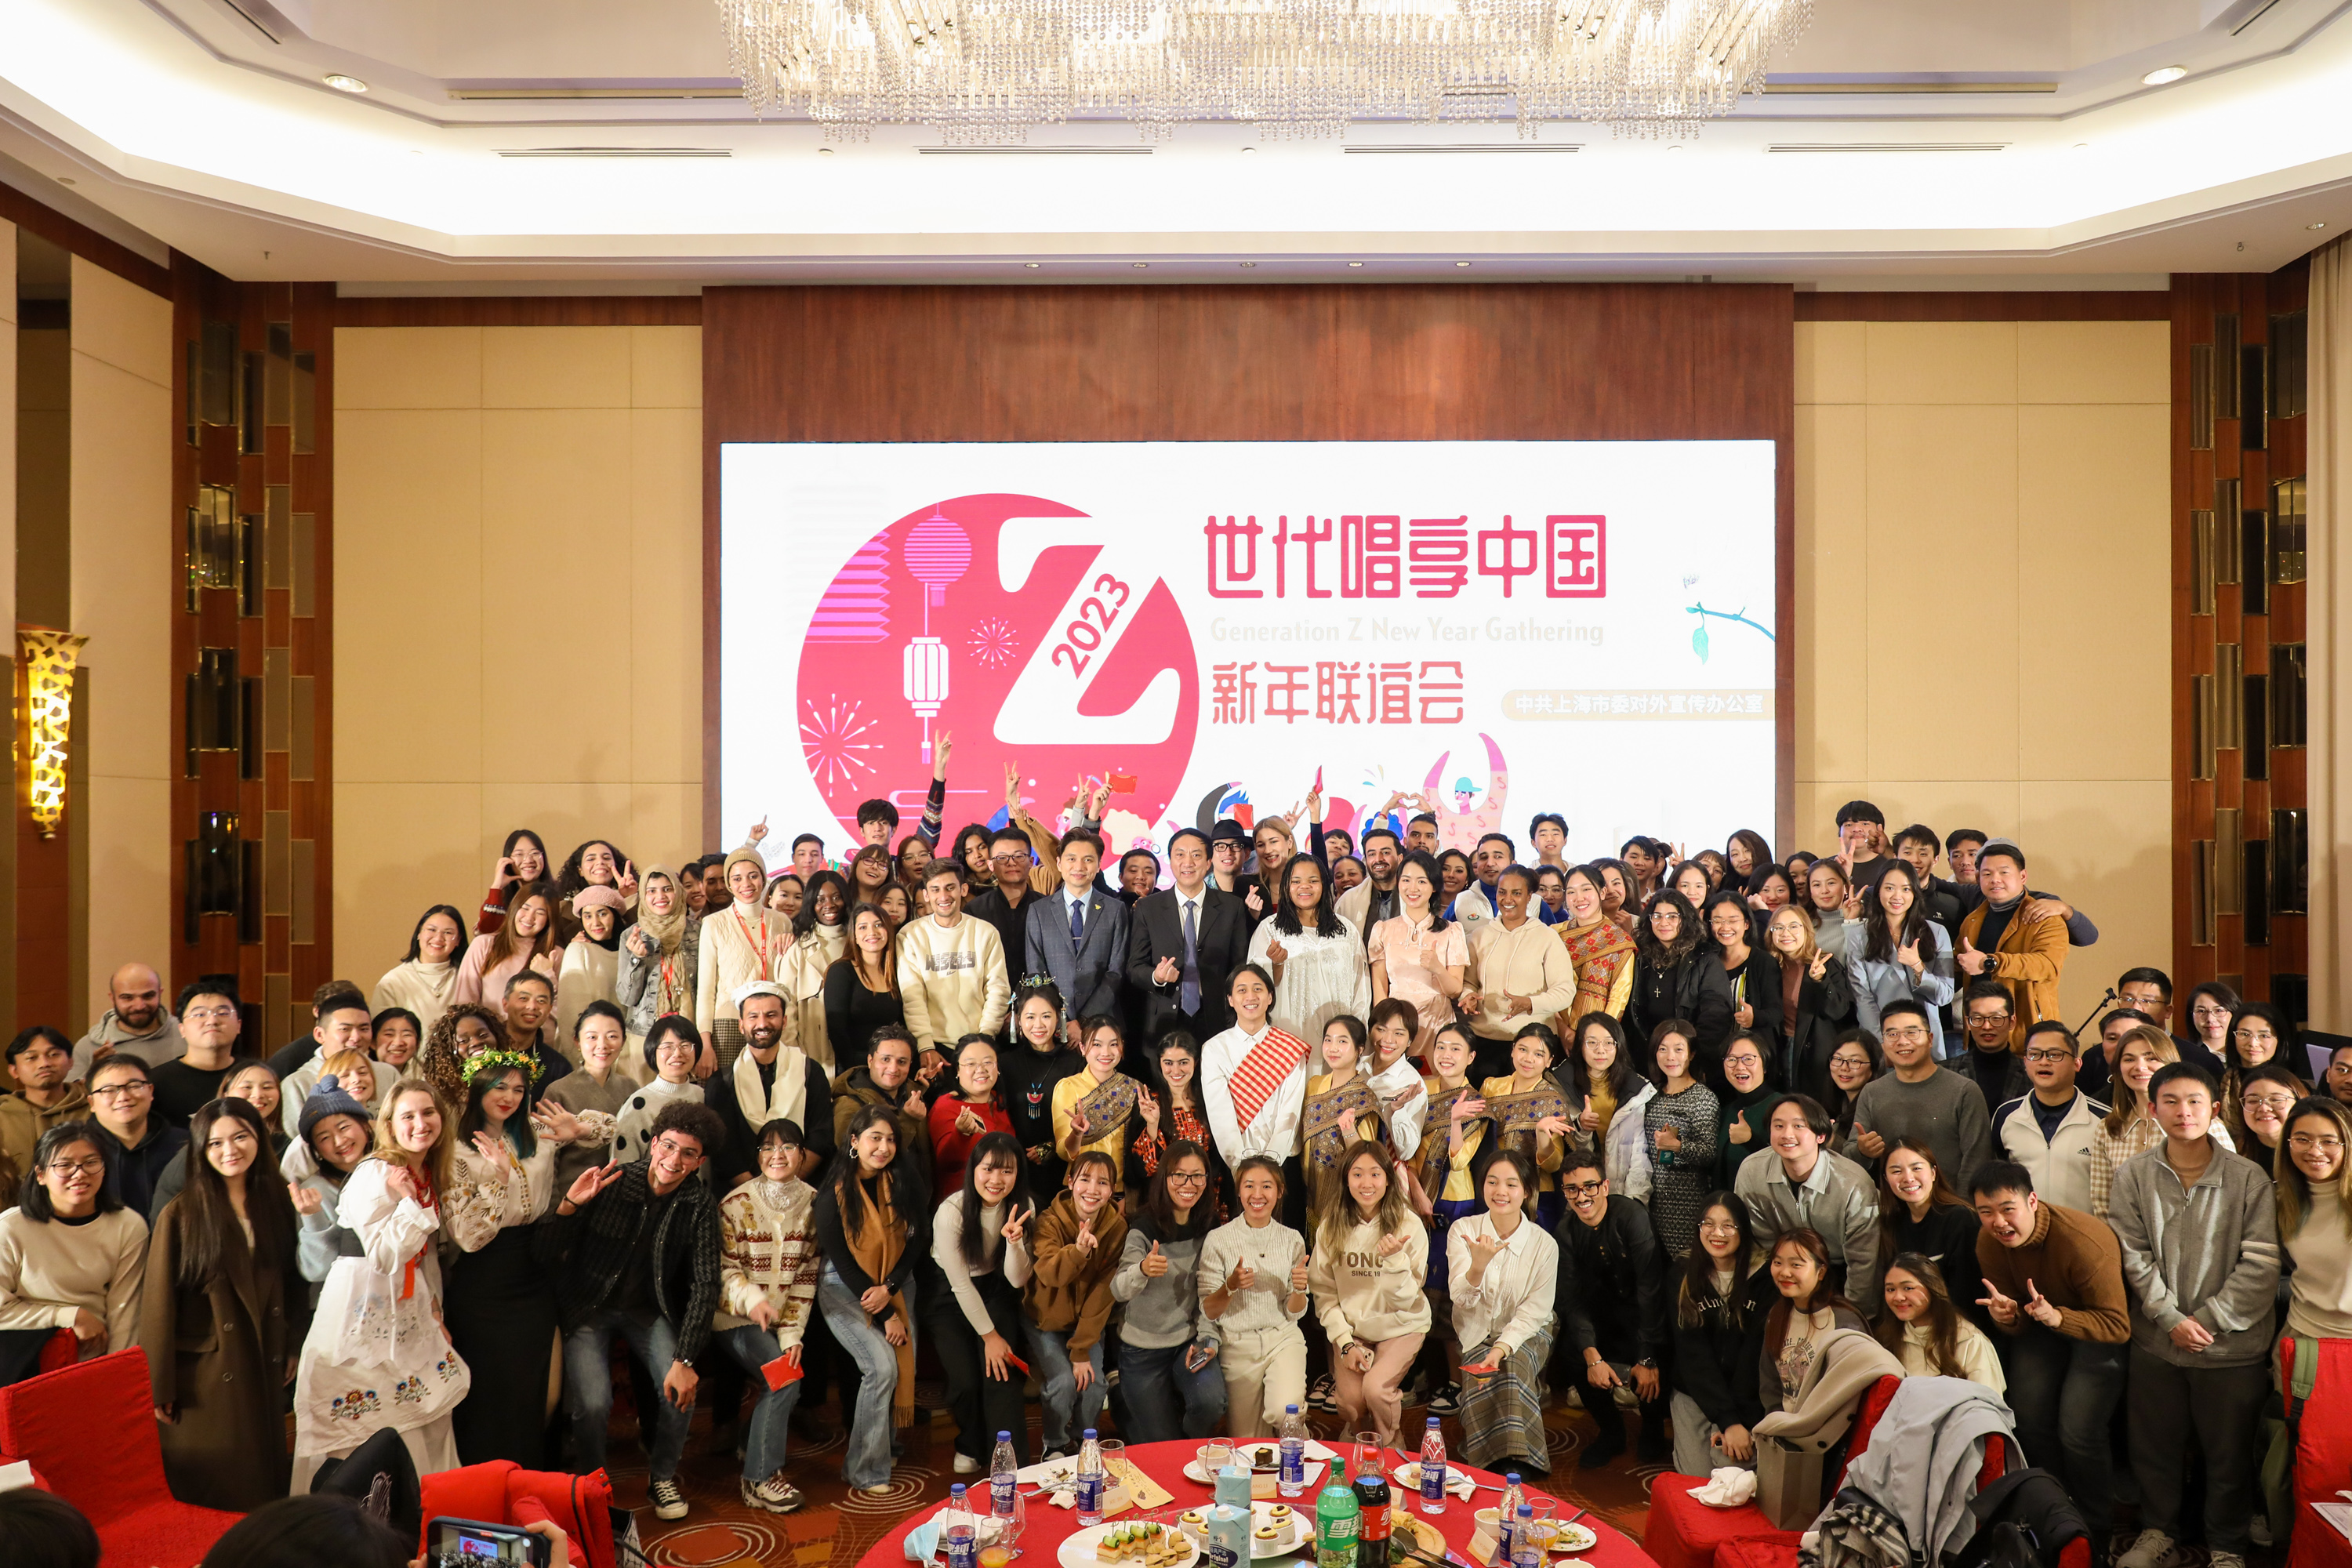 GenZ With Shanghai Stories Winners Revealed Today